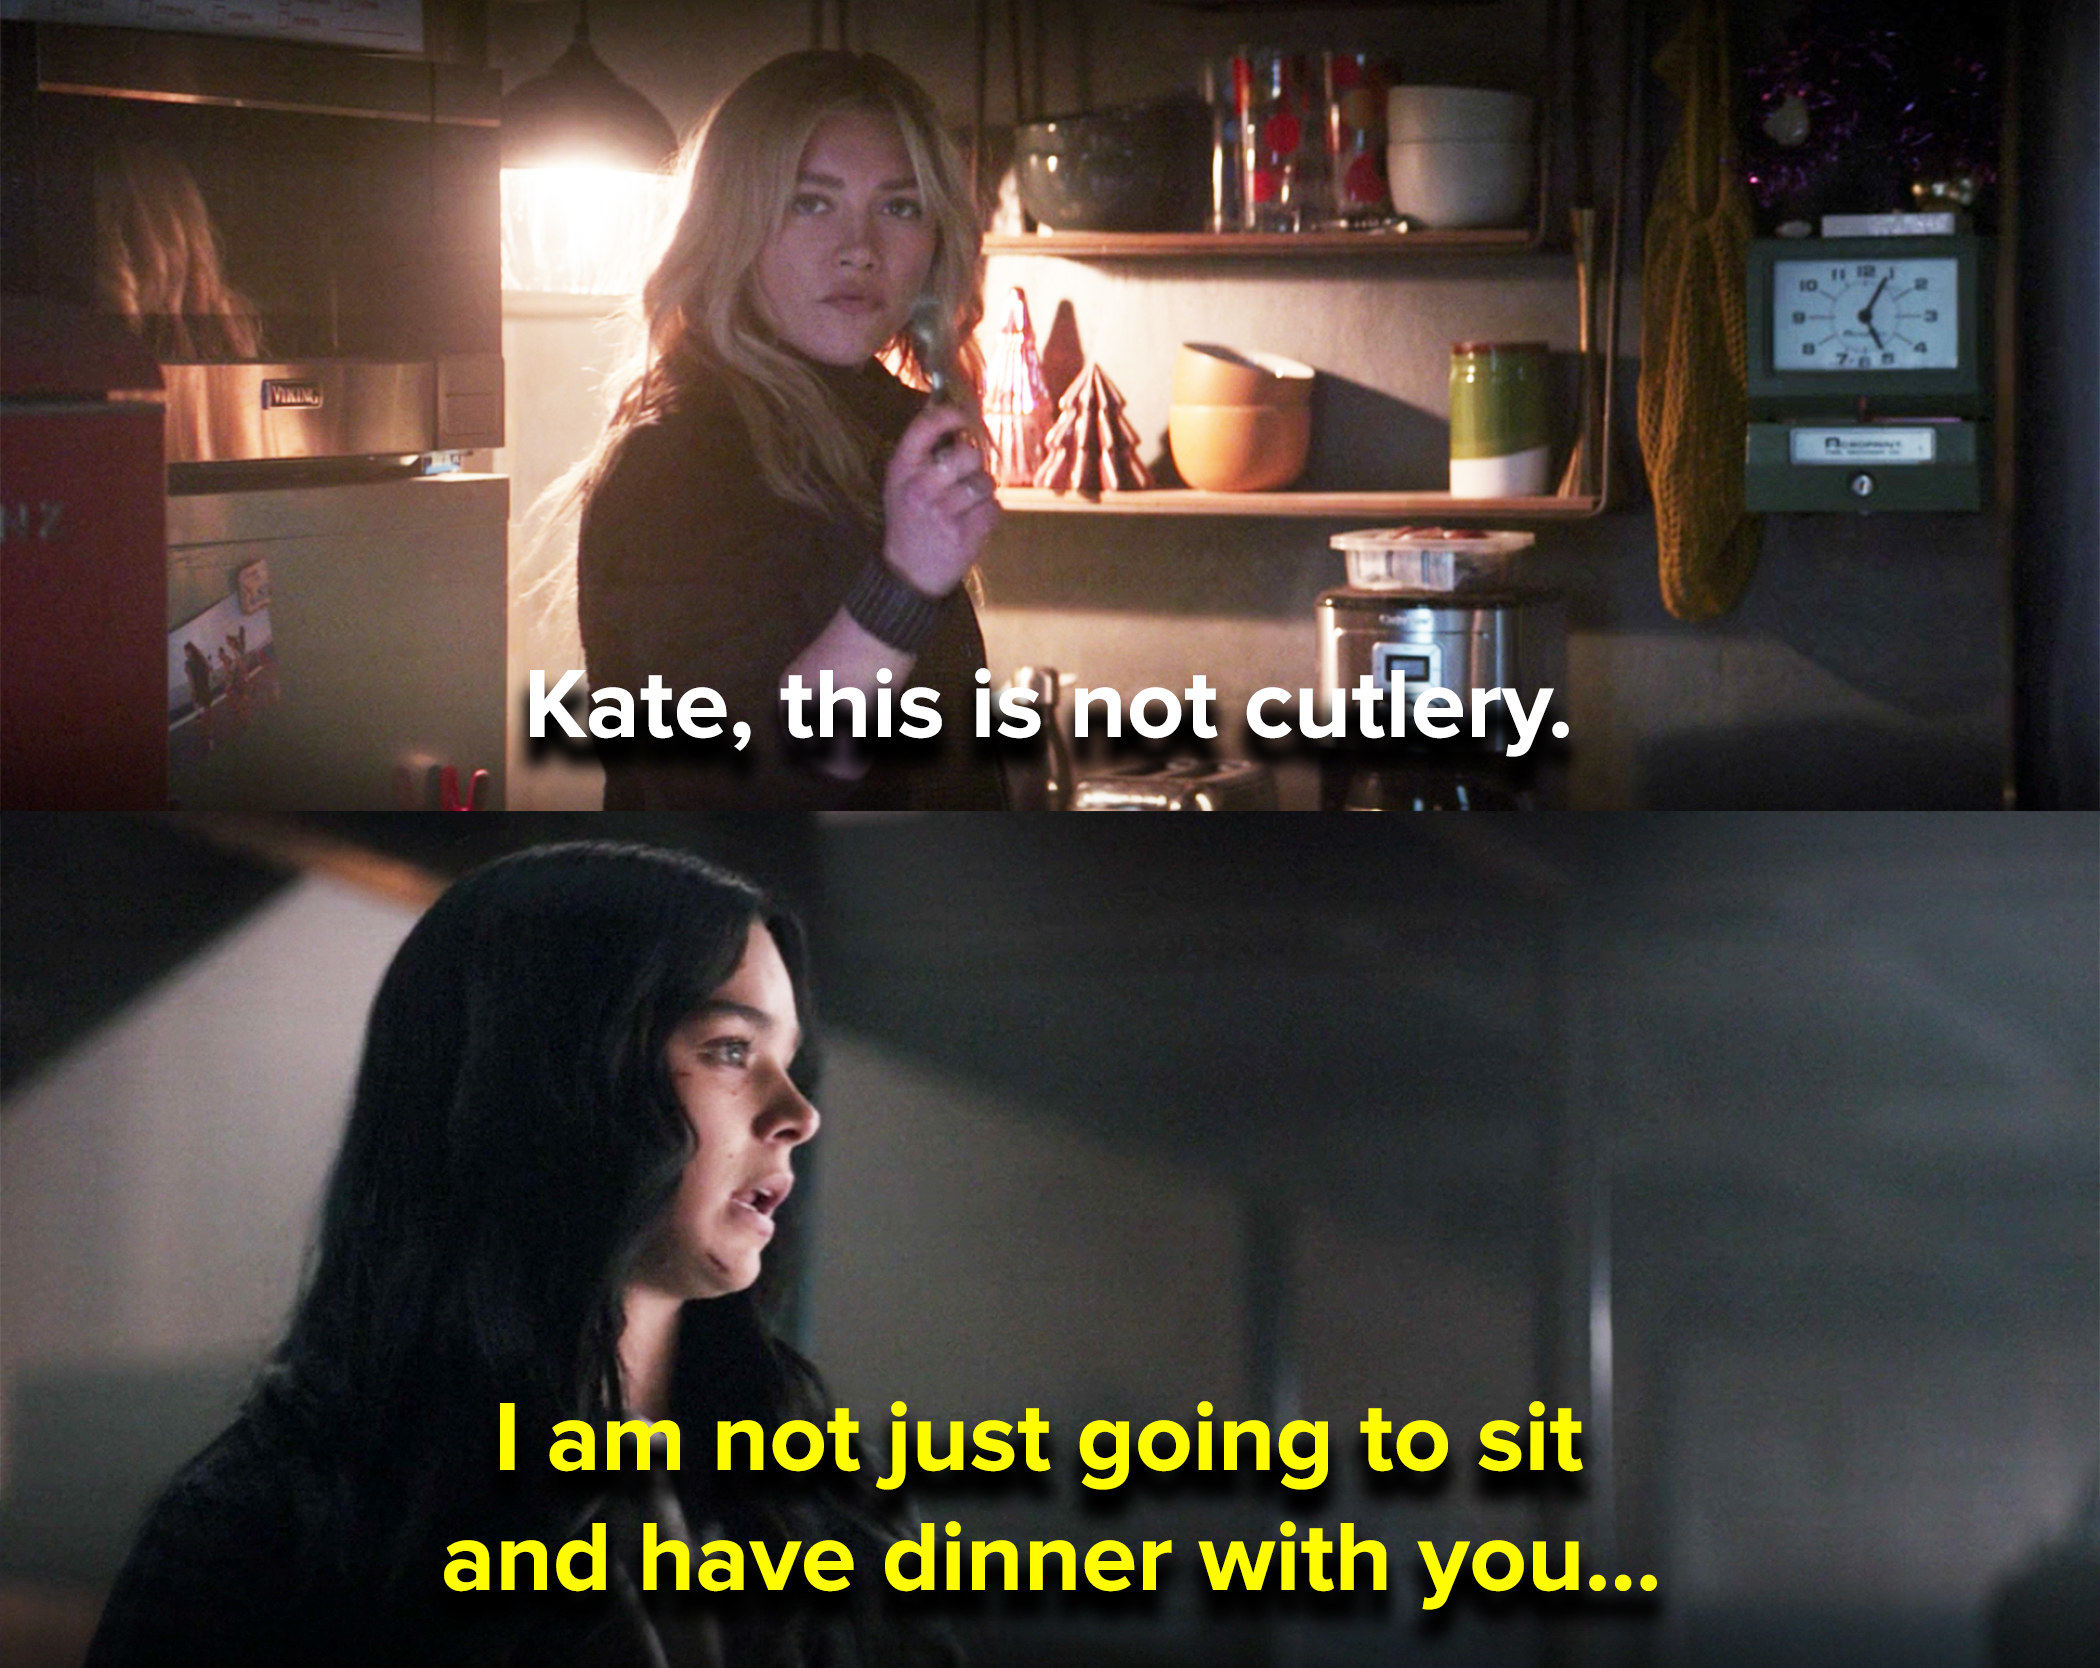 Yelena teases Kate for using plastic takeout cutlery, and Kate tries to get her to leave